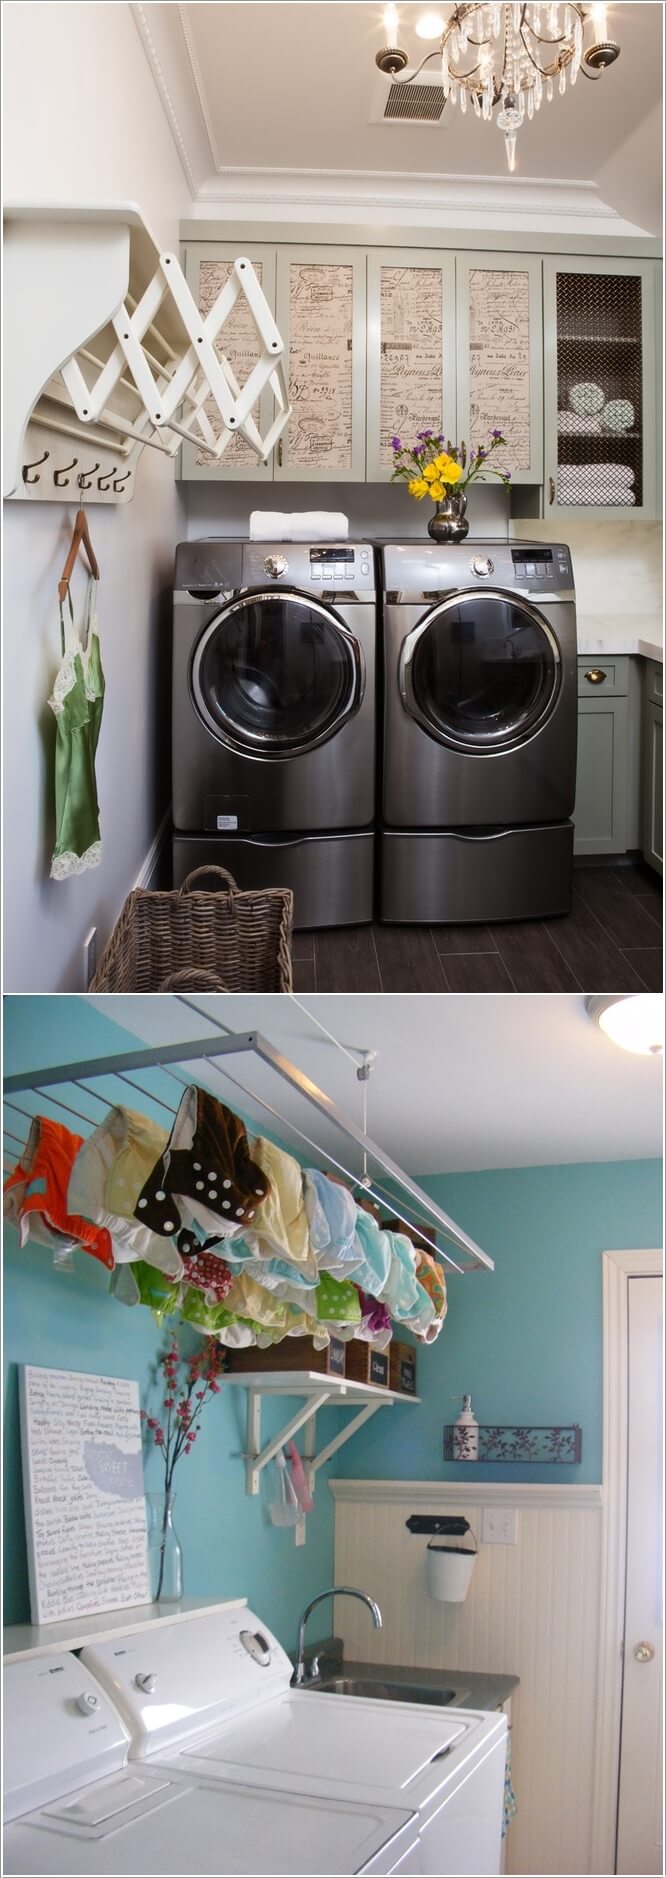 10 Space Saving Tips for a Small Laundry Room